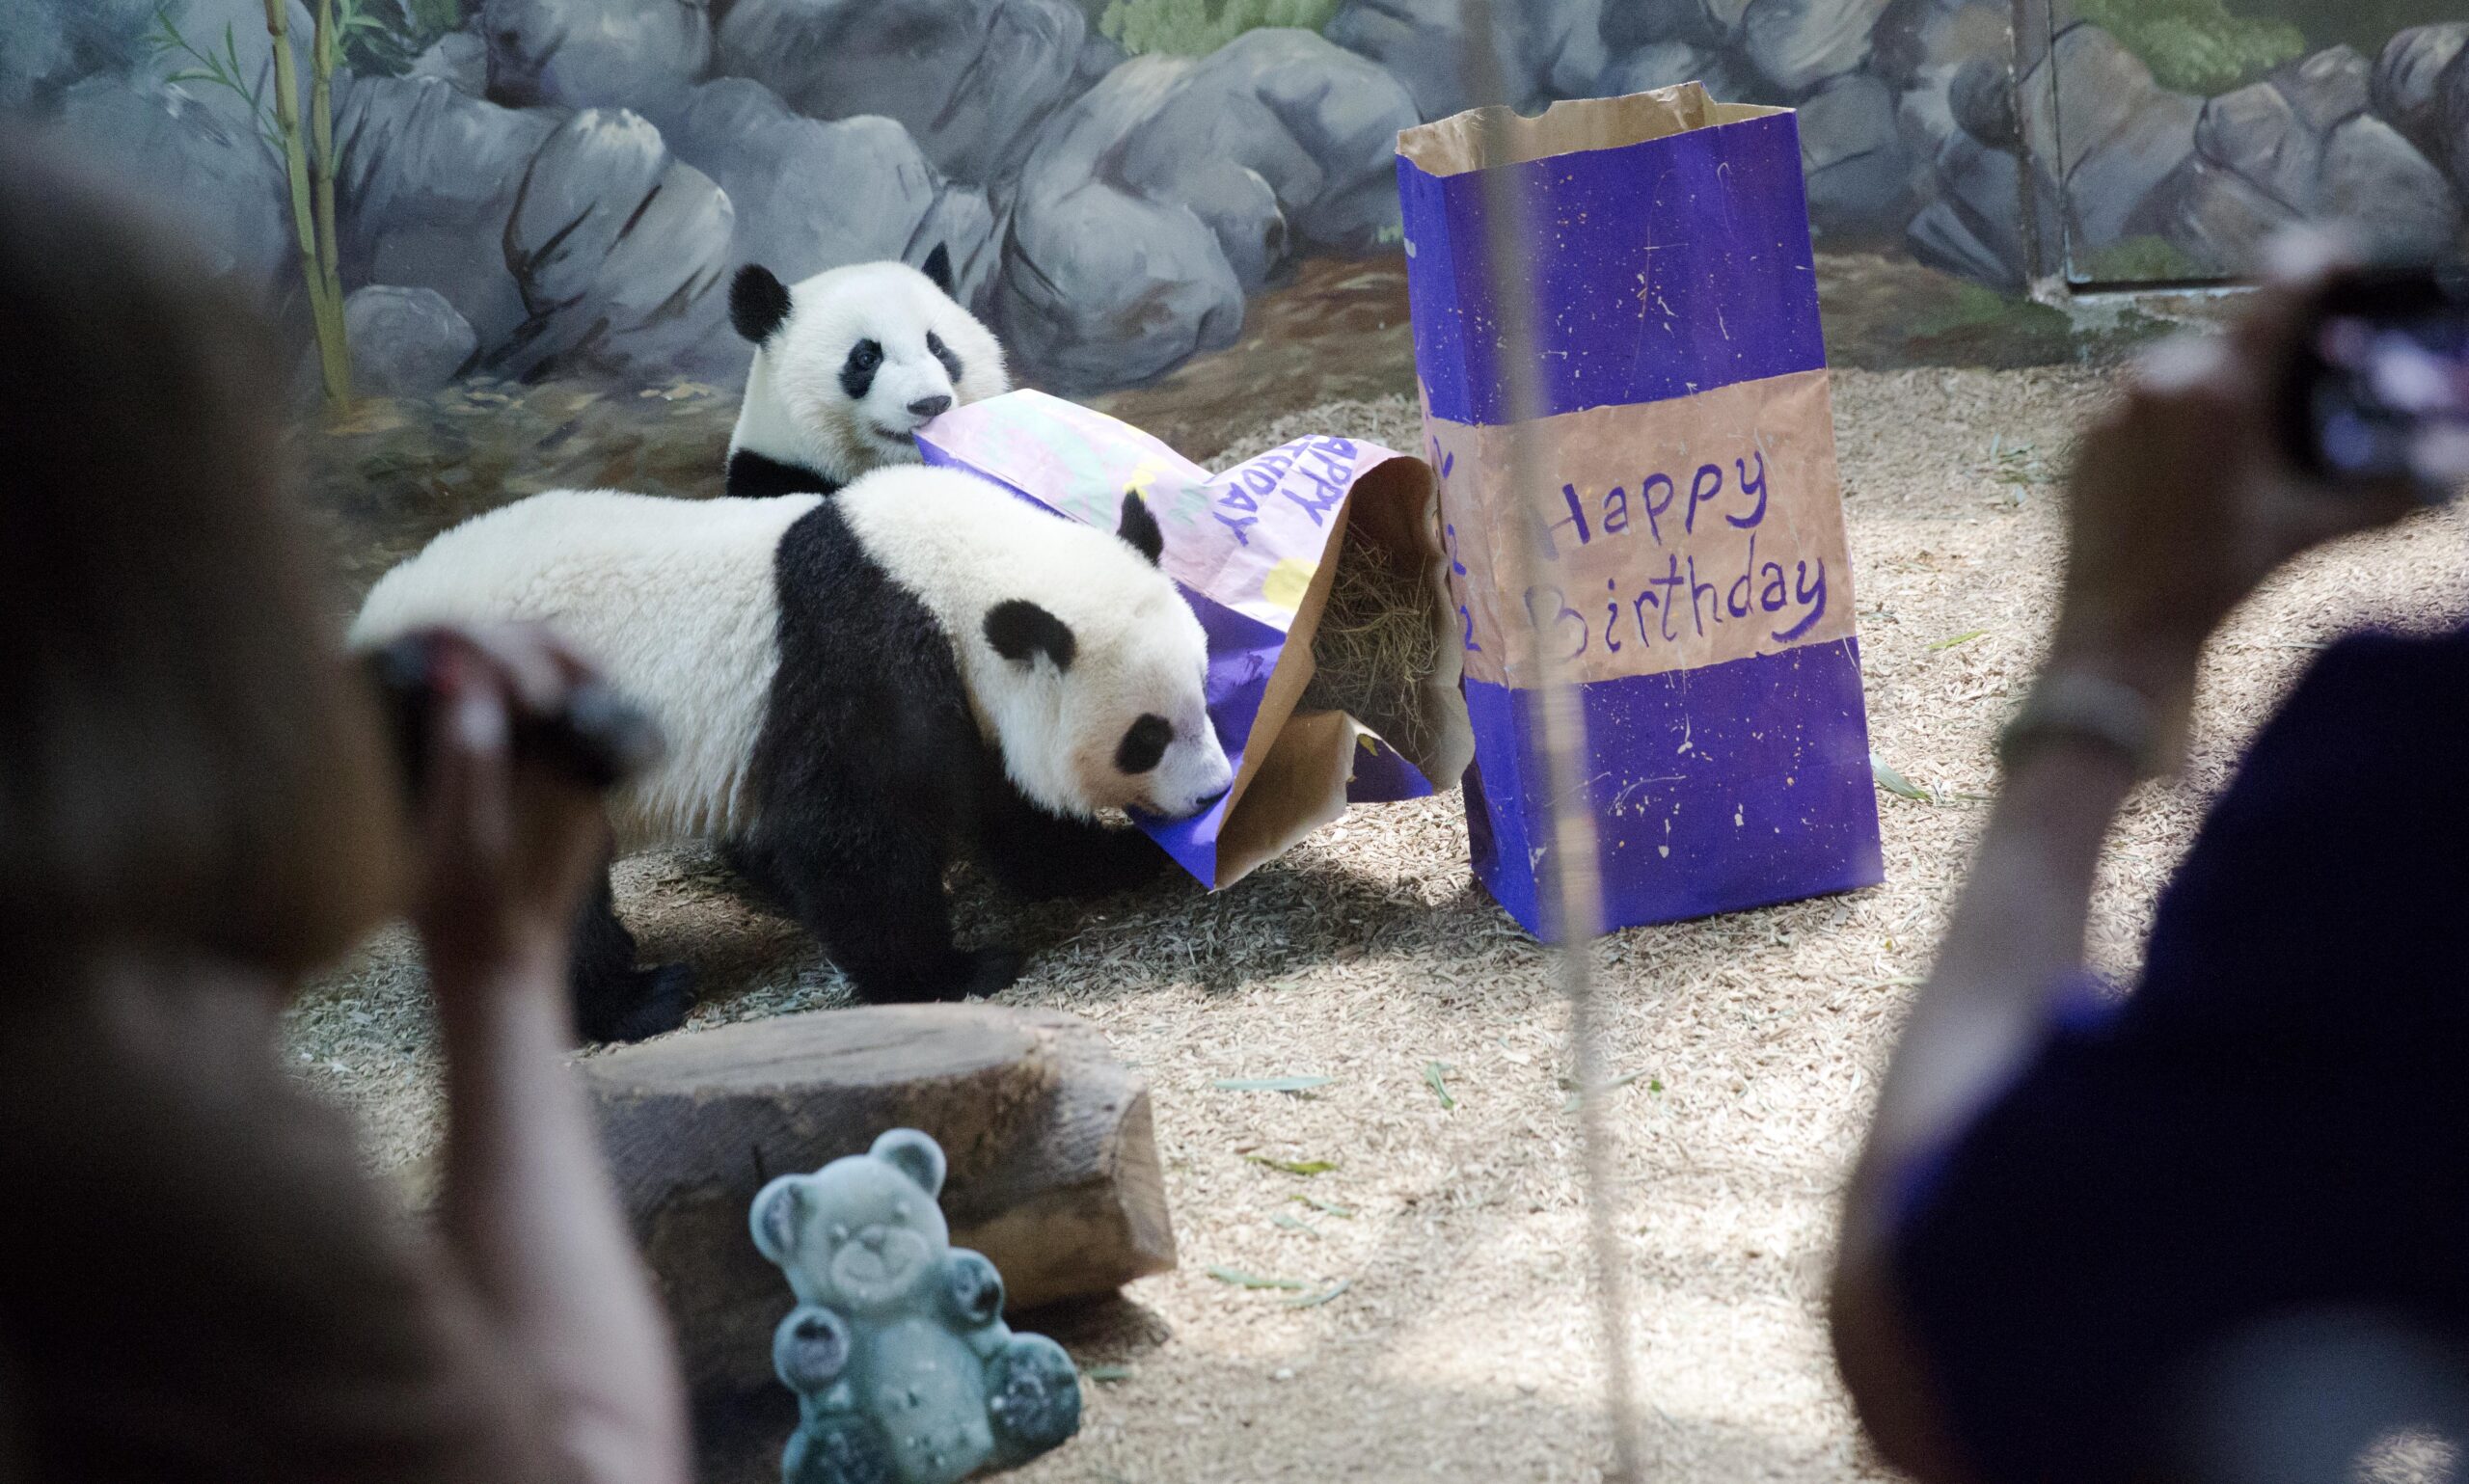 Zoo Atlanta's giant pandas soon to be the only ones left in America – WABE